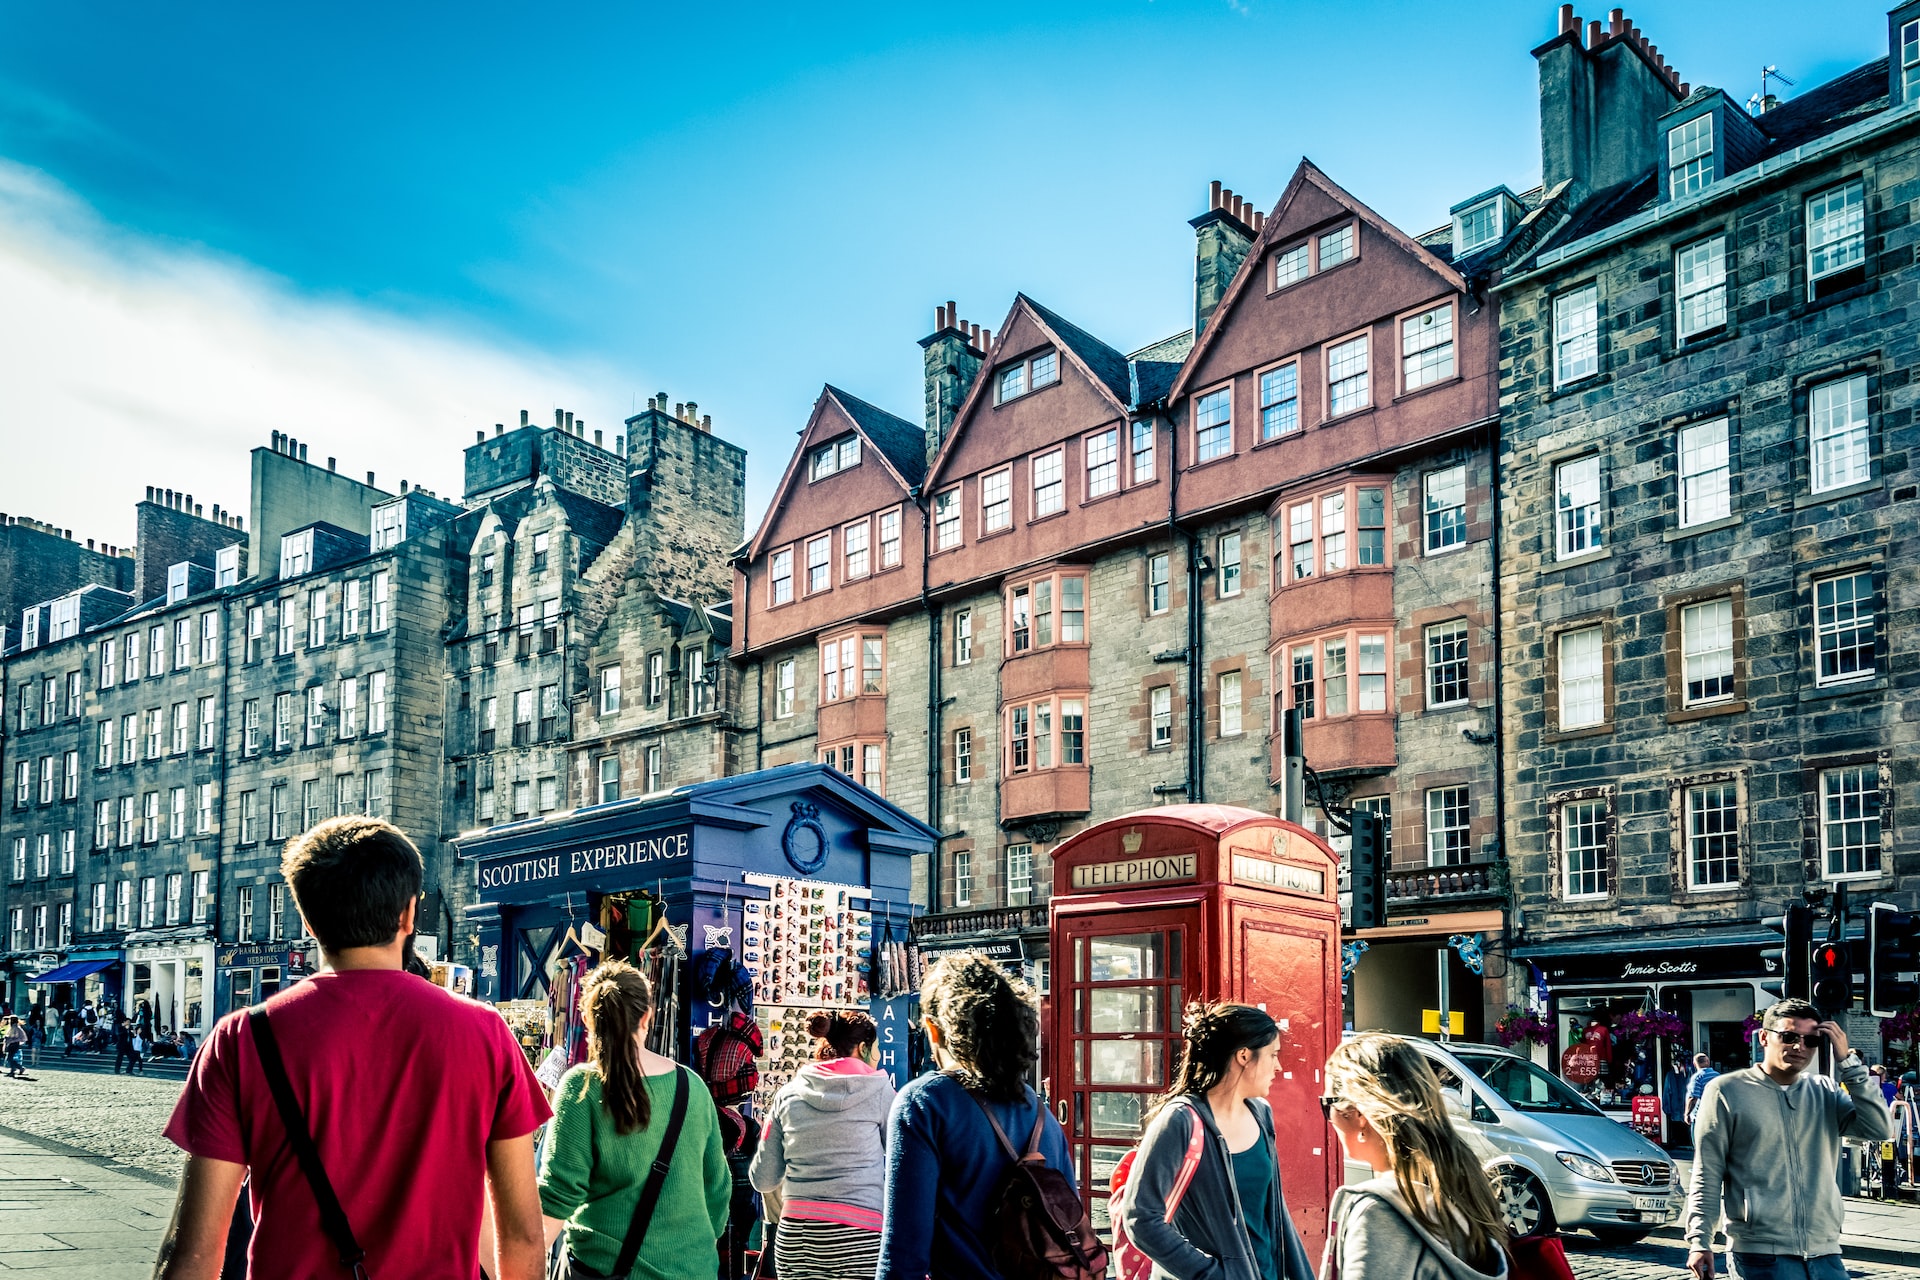 A family peruses the Royal Mile during the daytime.